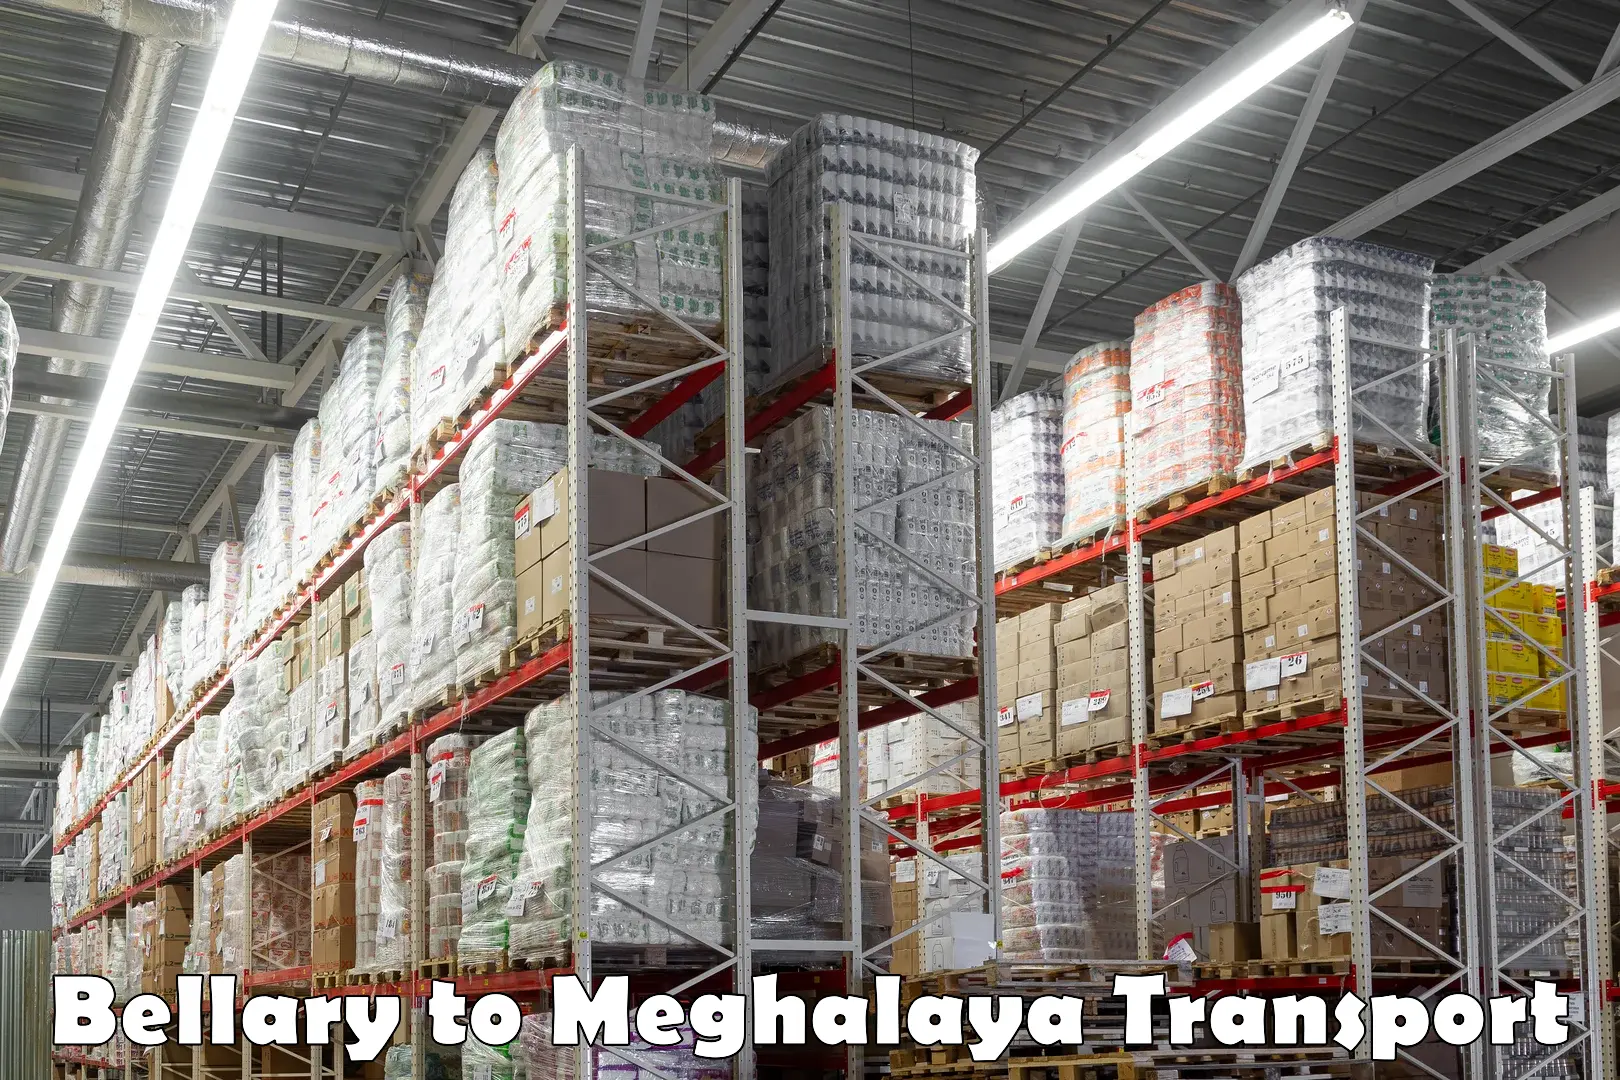 Express transport services in Bellary to Meghalaya